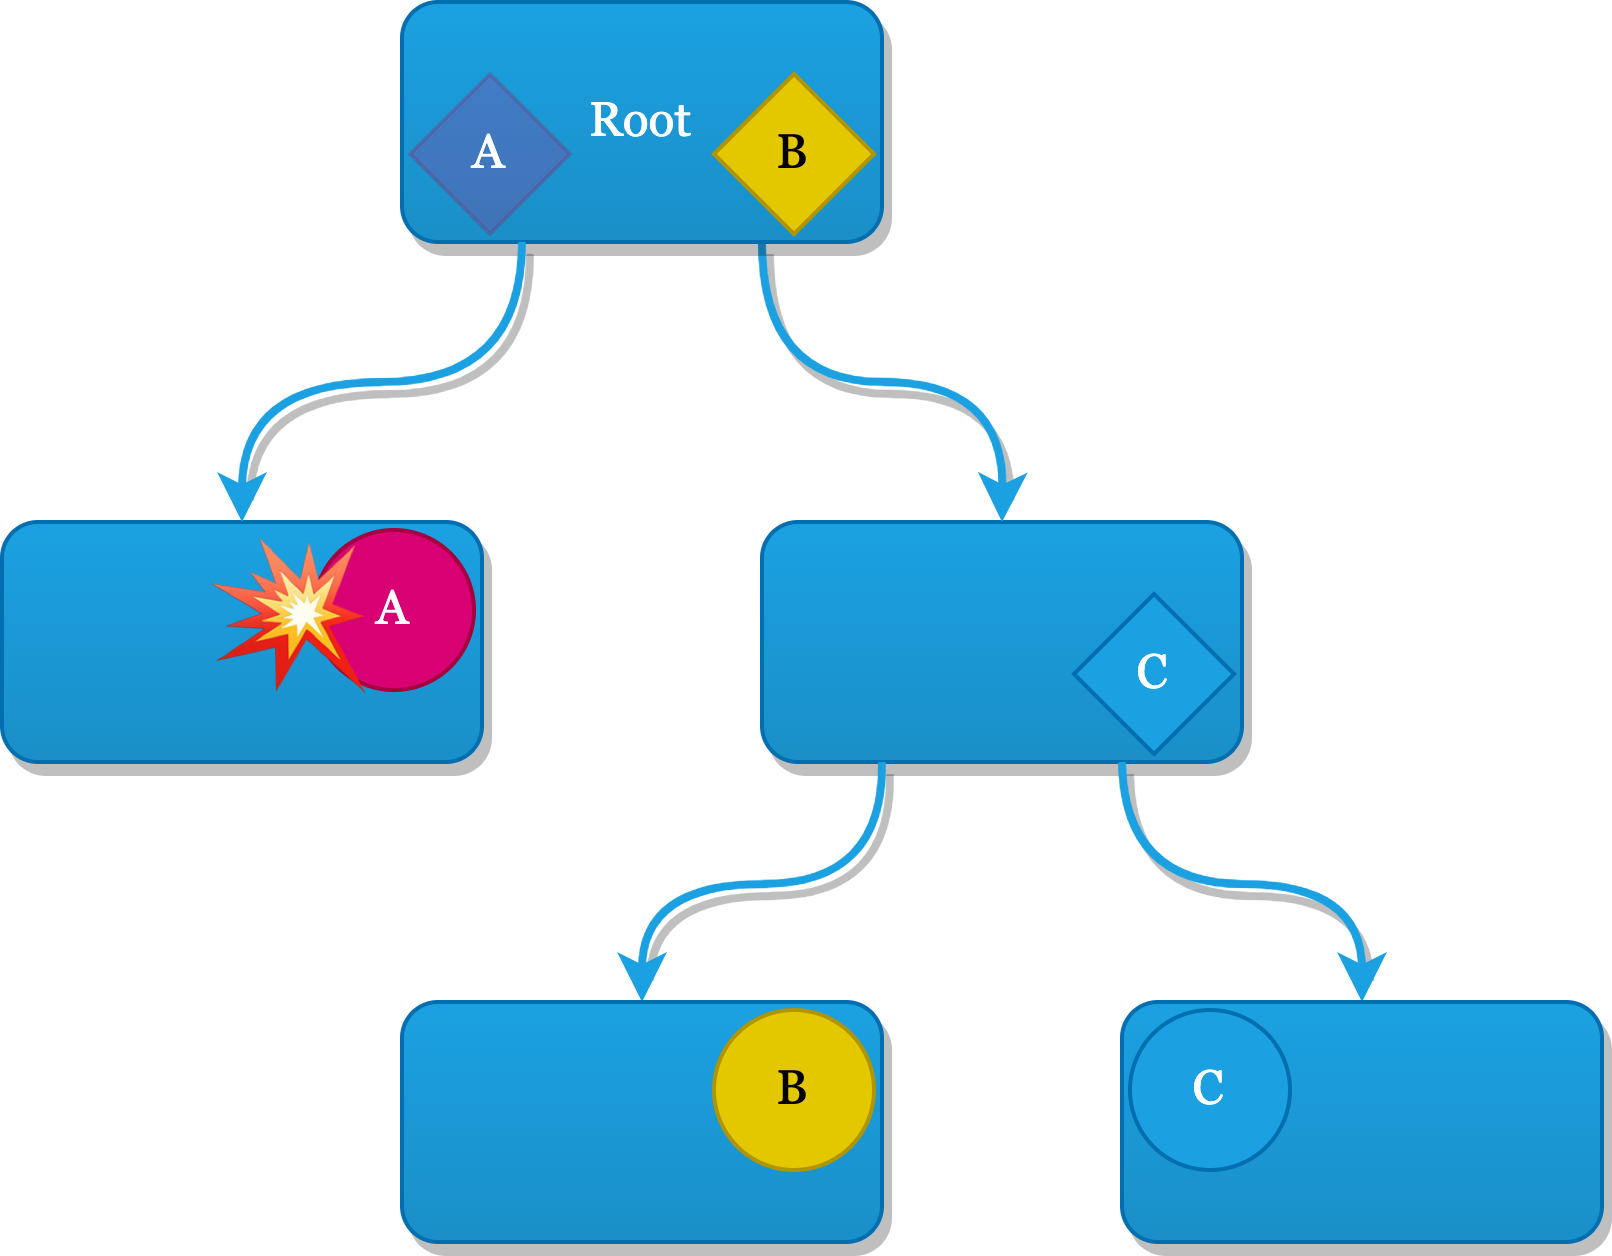 This diagram shows the EnvironmentObject approach. It looks really simple as it mimics the creation and consumption locations, but we see that the app crashes because dependency A has not been set on the Root node